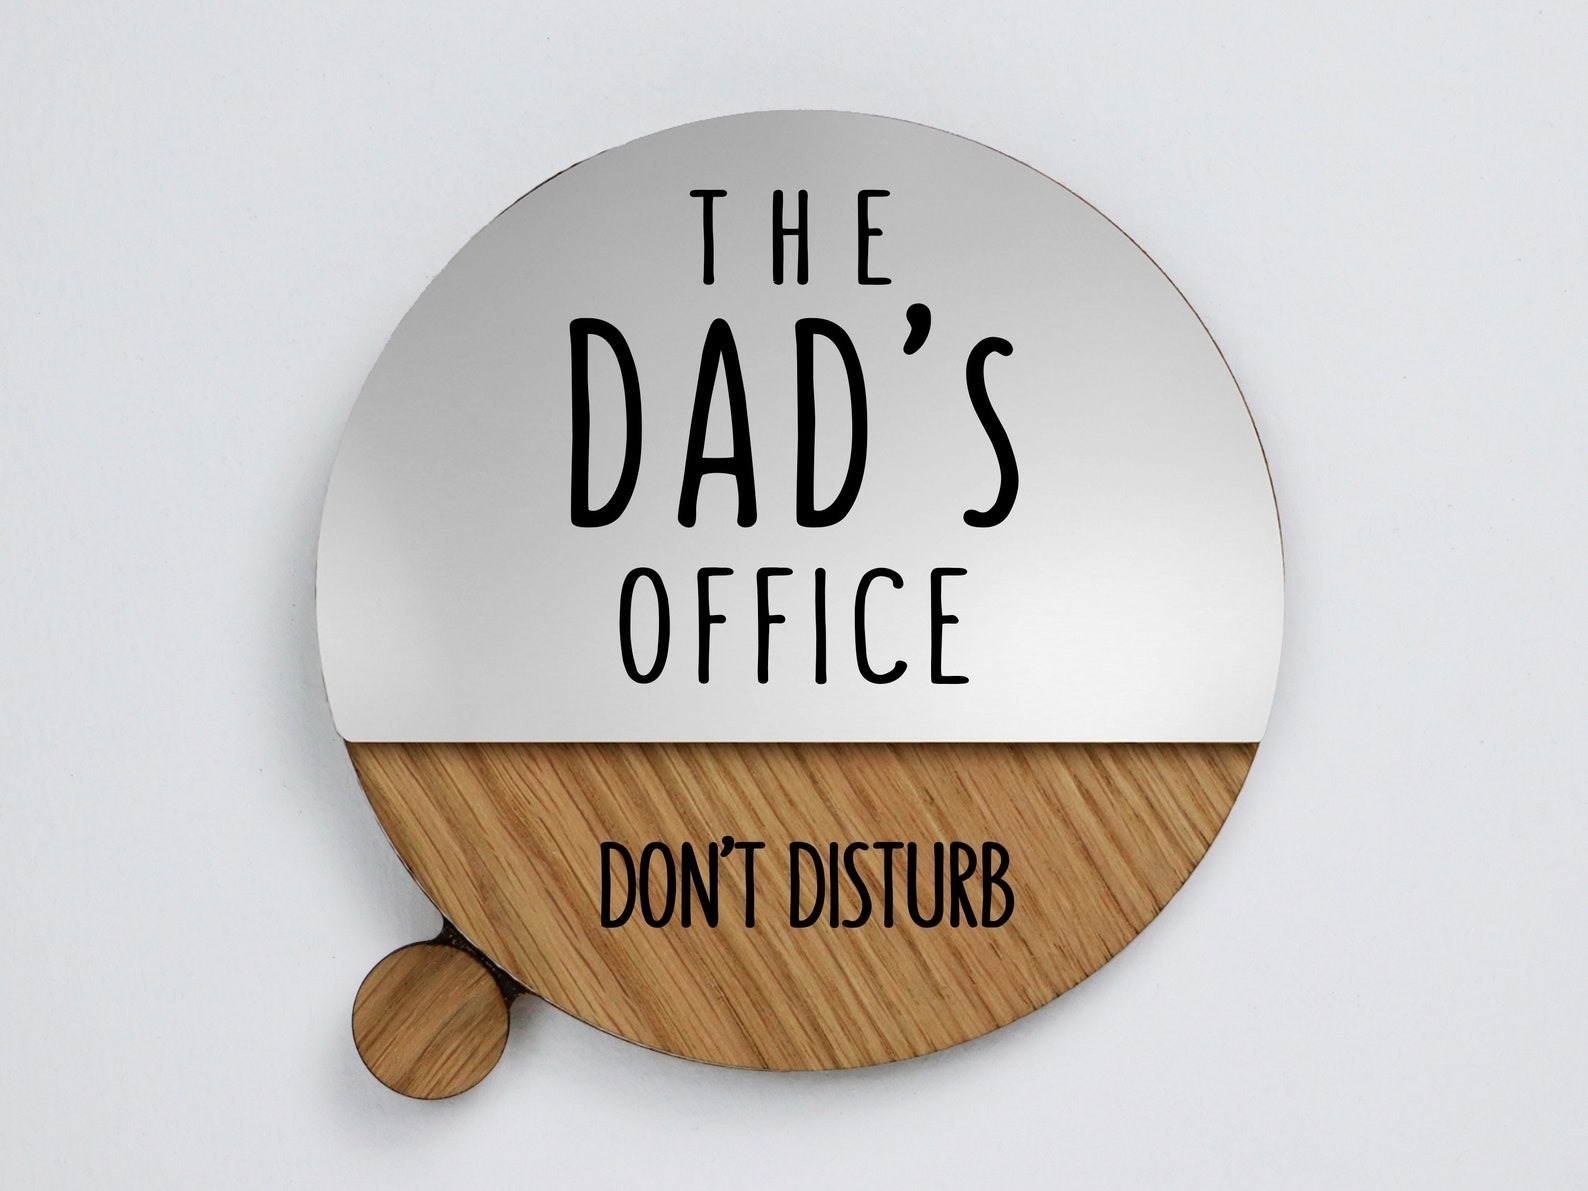 the office door sign that says &quot;the dad&#x27;s office, don&#x27;t disturb&quot;